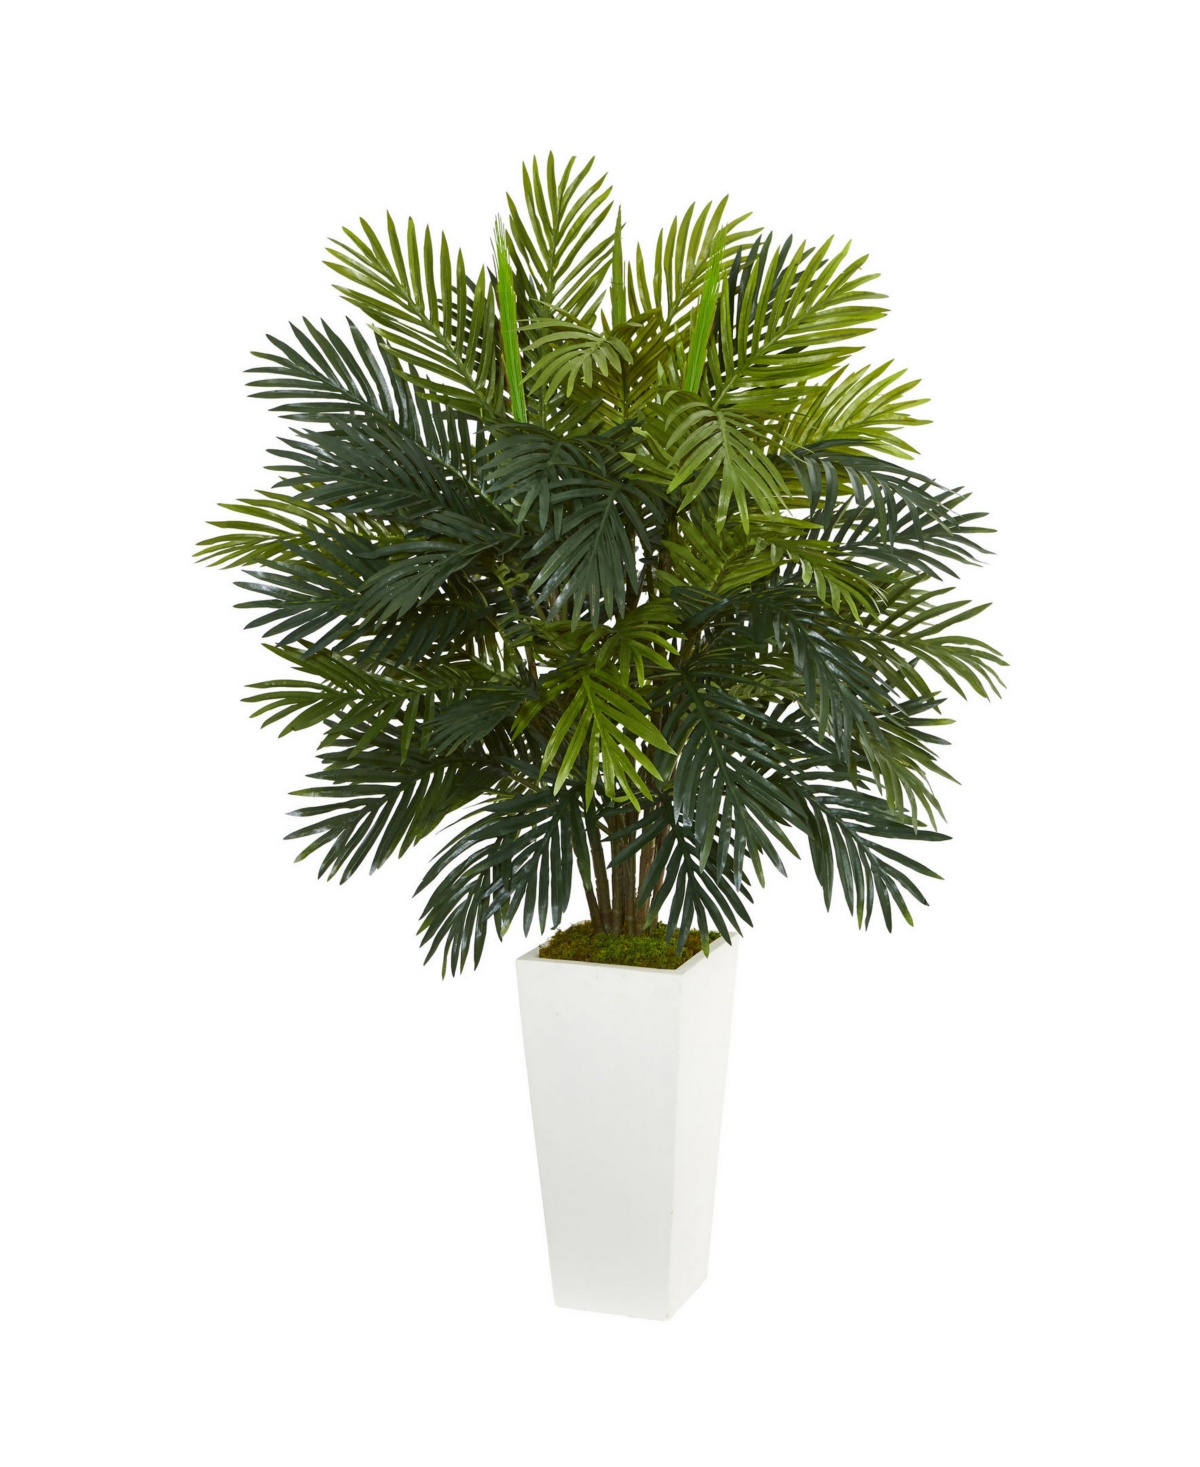 45" Areca Palm Artificial Plant in White Tower Planter - Green